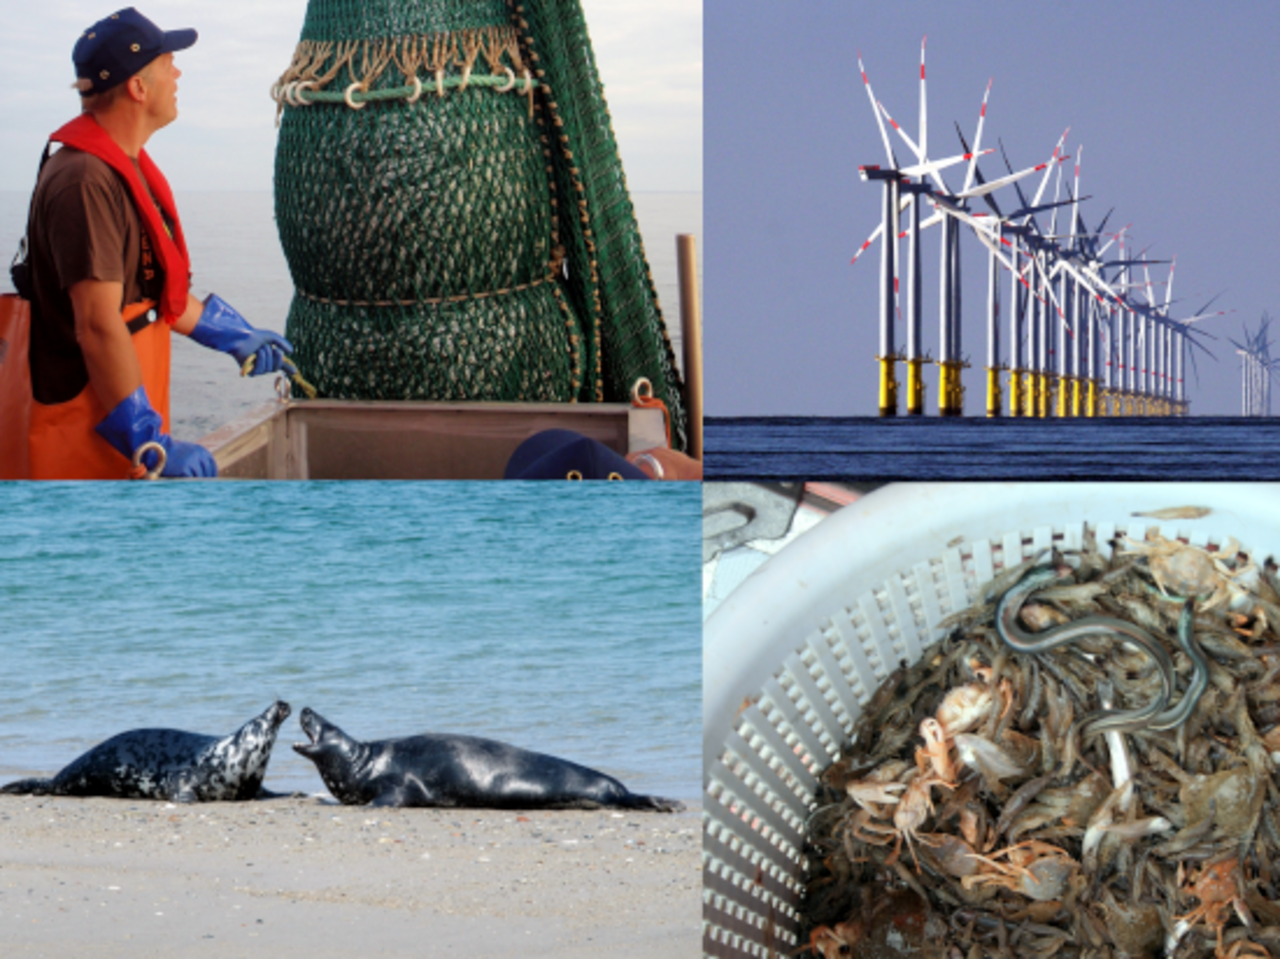 Challenges for EU fisheries policy